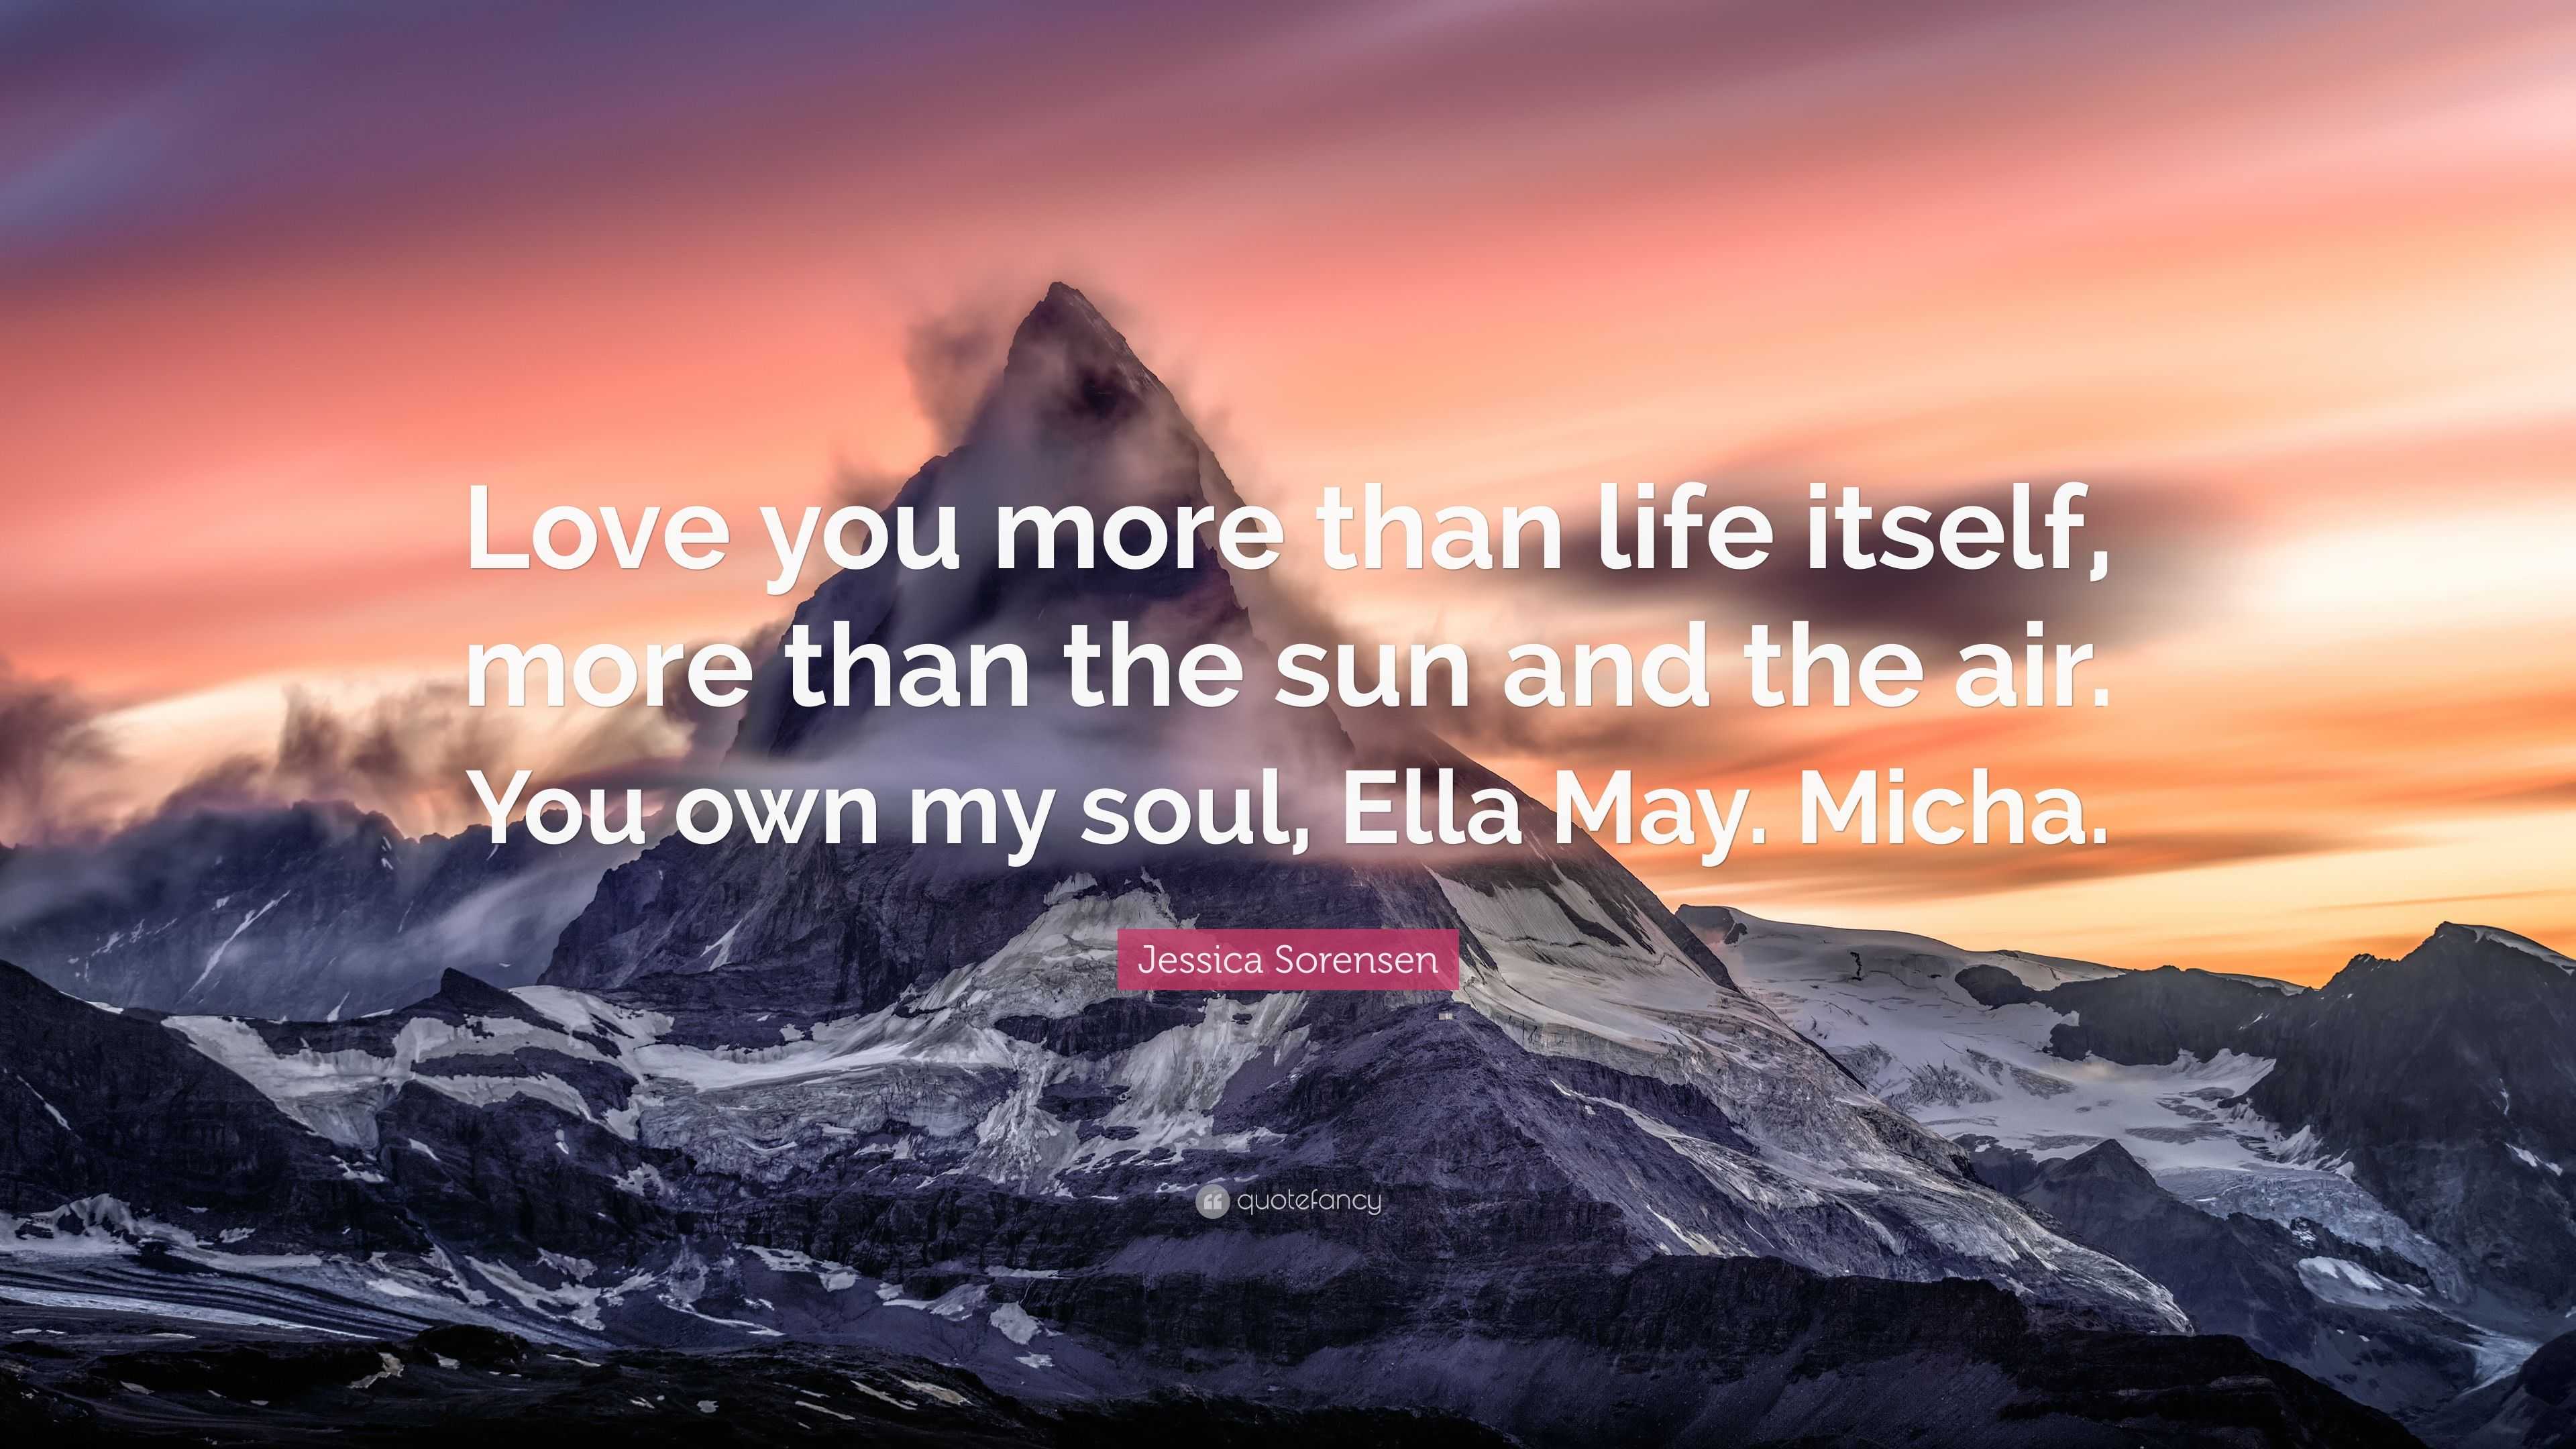 Jessica Sorensen Quote Love You More Than Life Itself More Than The Sun And The Air